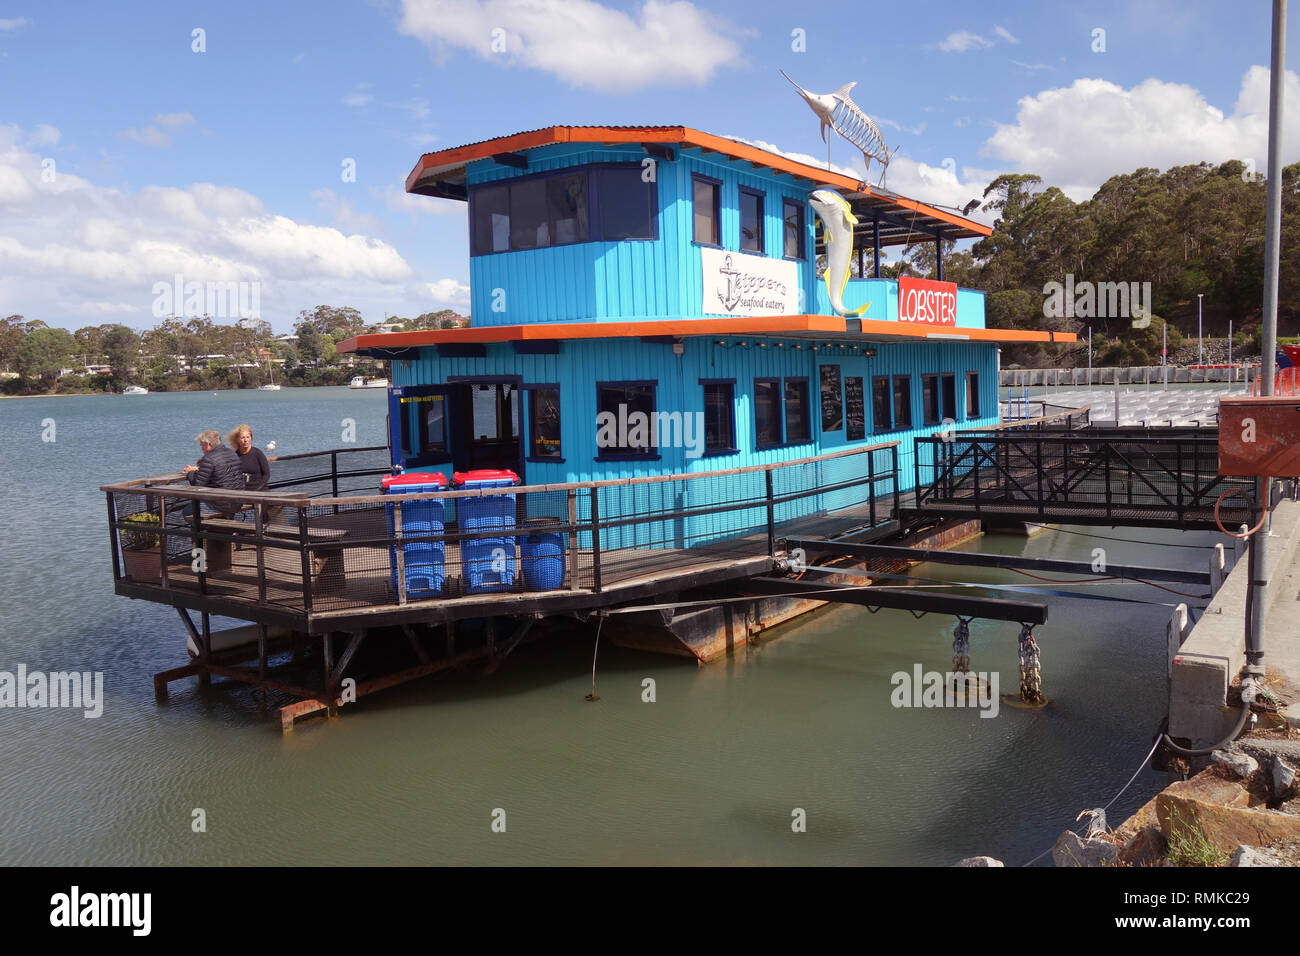 Skippers seafood eatery, a floating restaurant at St Helens, Tasmania, Australia. No PR or MR Stock Photo